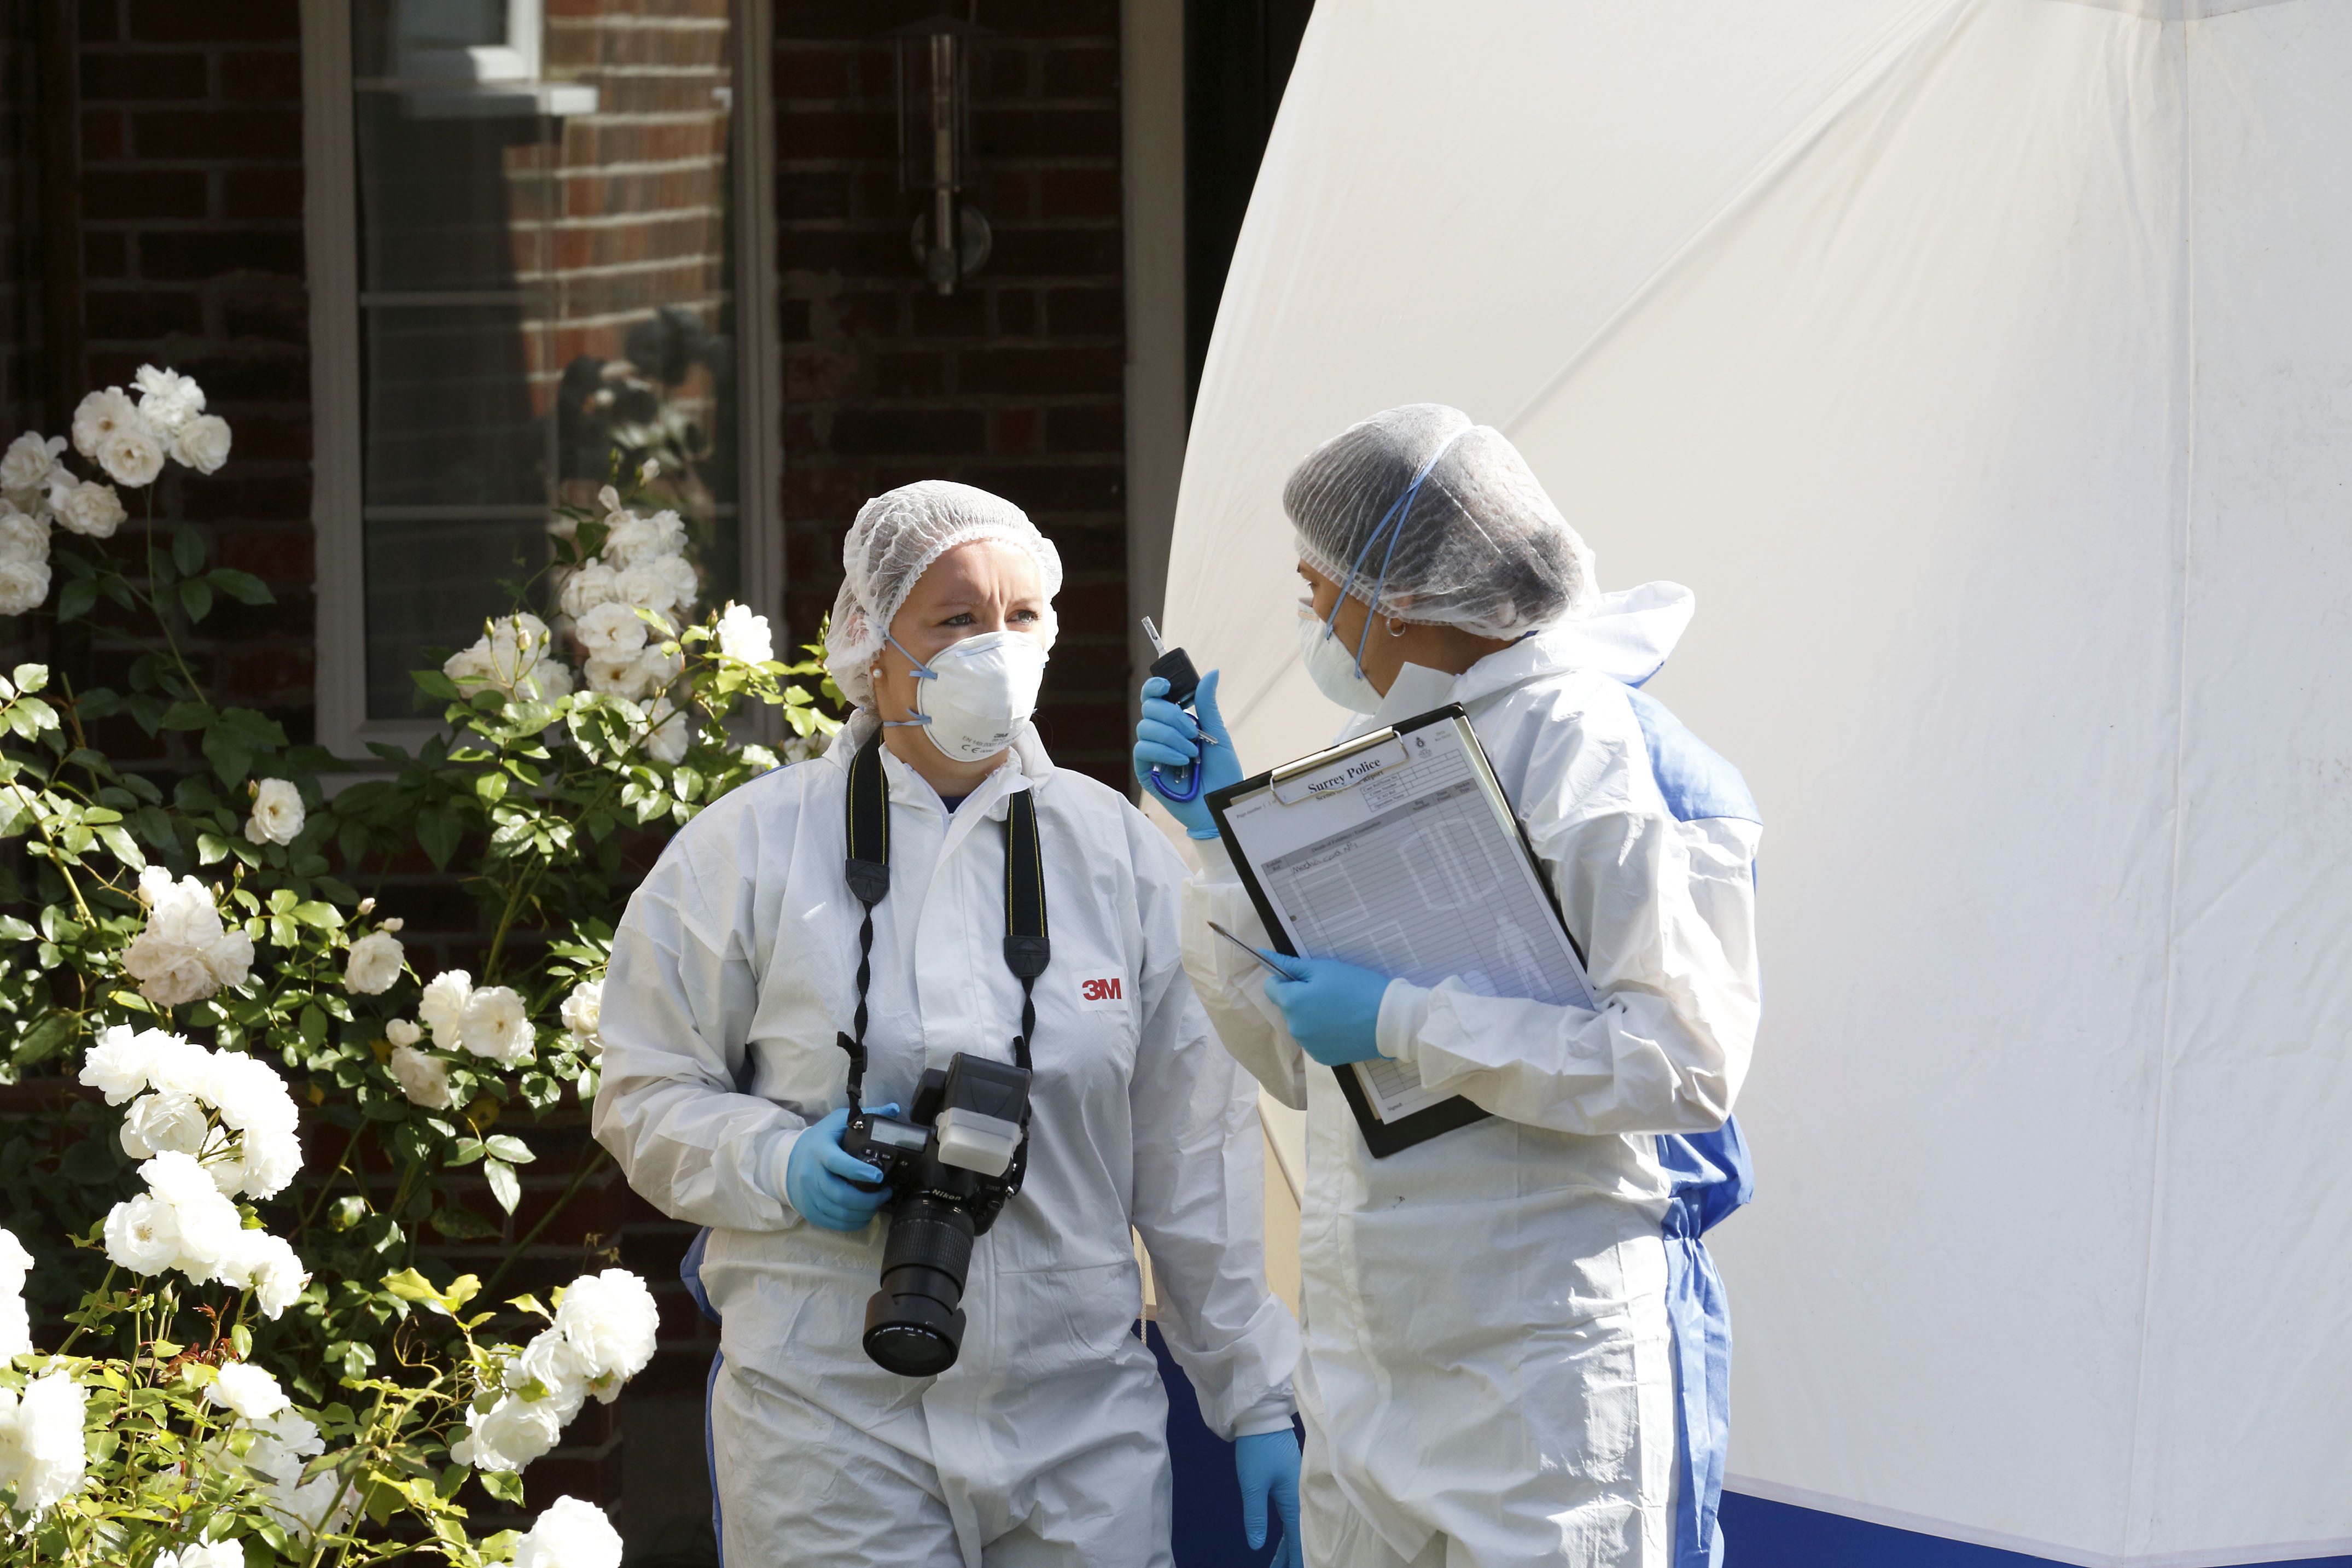 British forensic officers at the home of the al-Hilli family after the gun attack. Photo: AFP